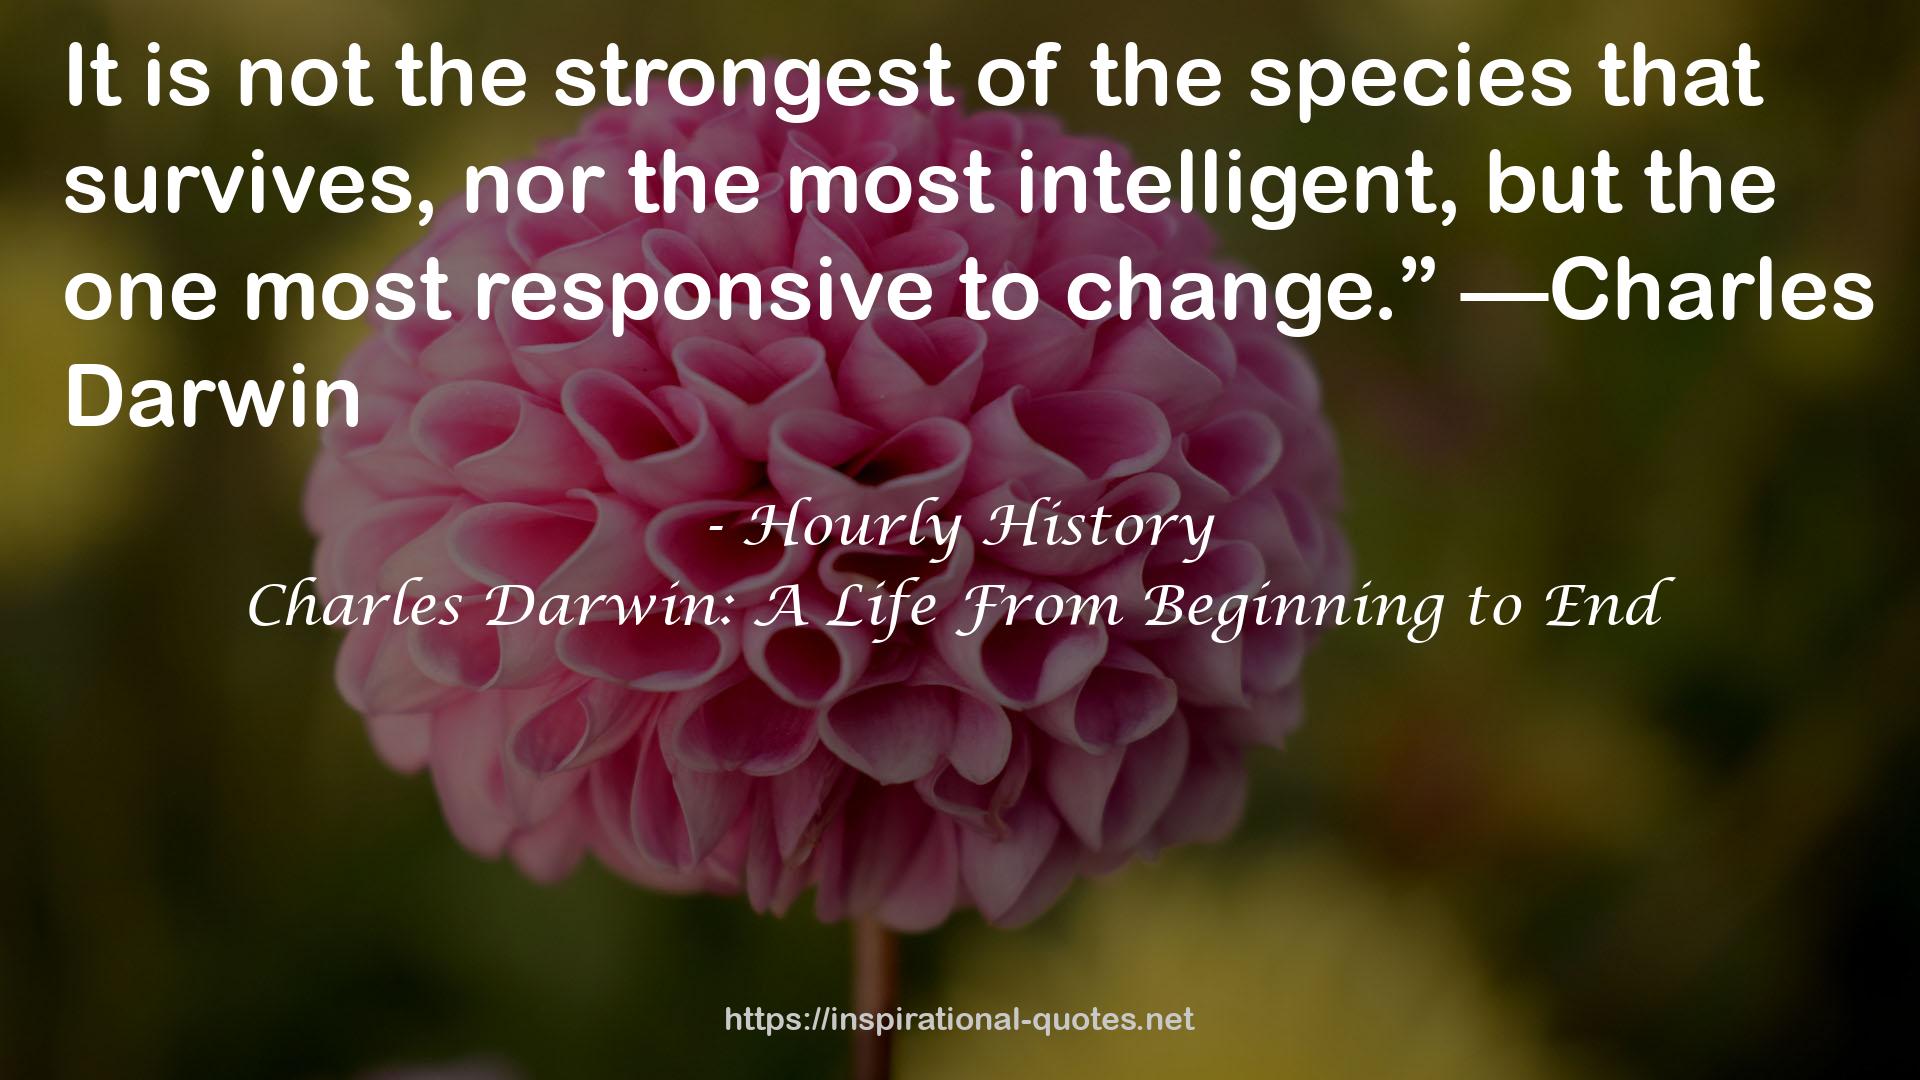 Charles Darwin: A Life From Beginning to End QUOTES